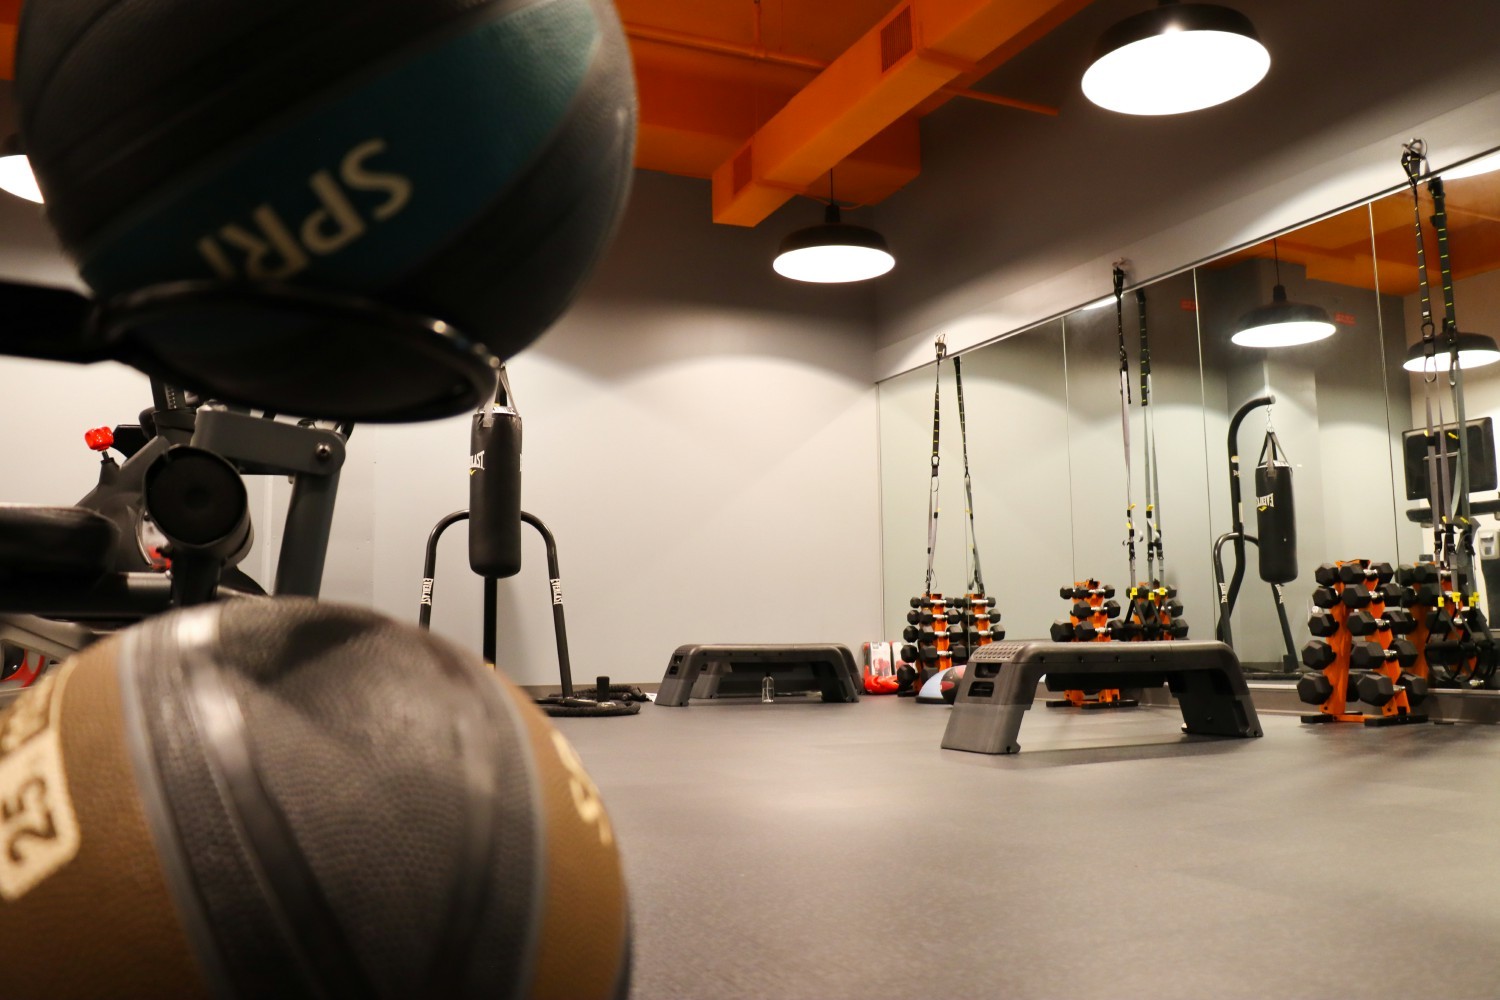 Stax offers an array of Health and Wellness initiatives, including an in-office gym and employee-led workout sessions